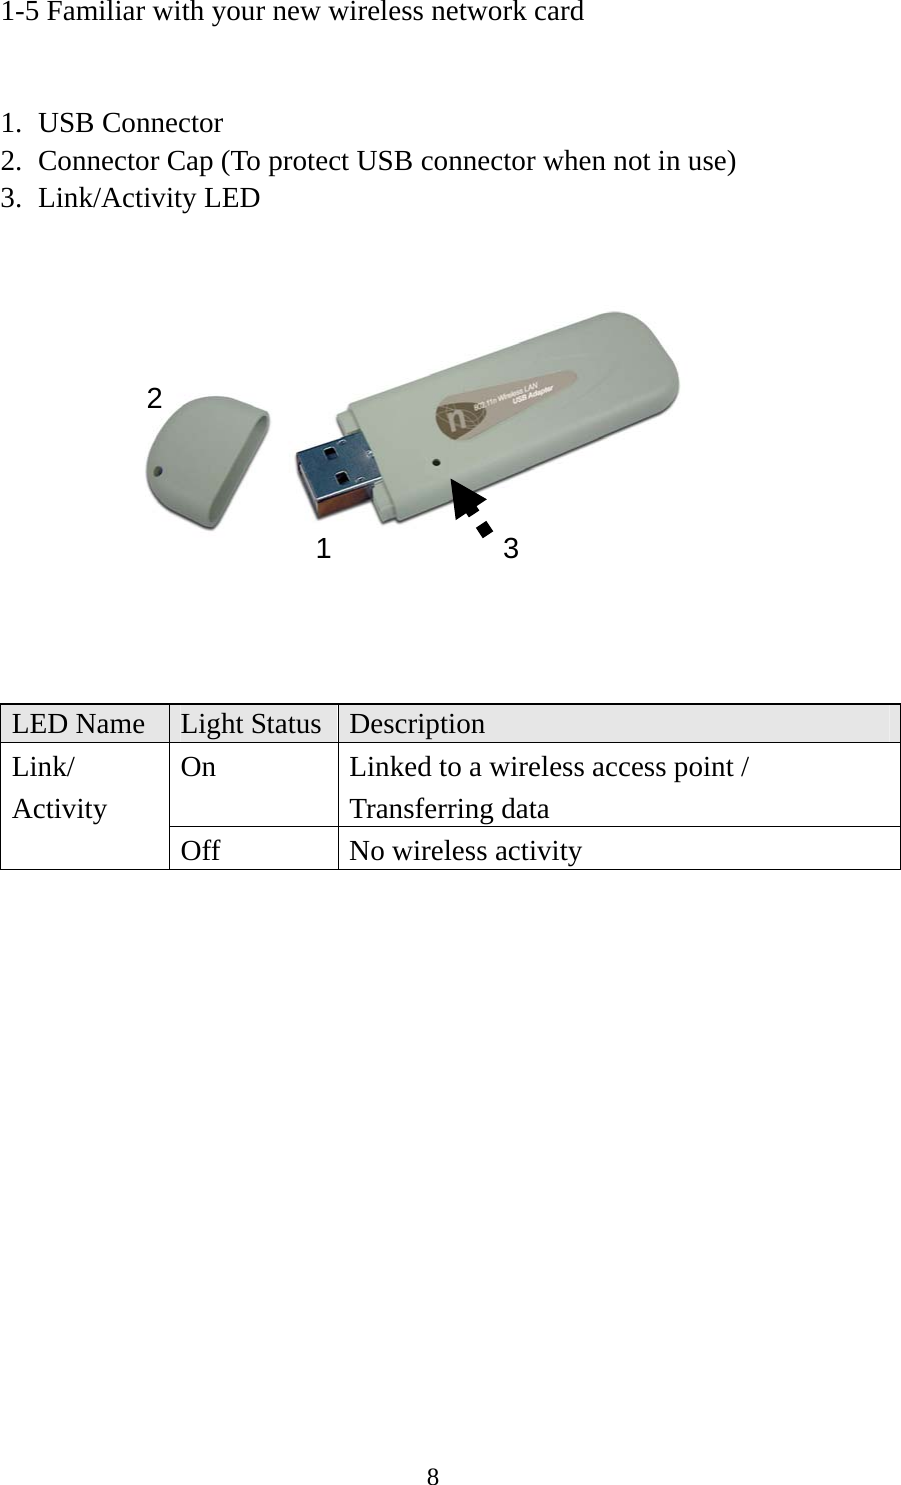  81-5 Familiar with your new wireless network card   1. USB Connector 2. Connector Cap (To protect USB connector when not in use) 3. Link/Activity LED              LED Name  Light Status  Description On  Linked to a wireless access point / Transferring data Link/ Activity Off  No wireless activity  12 3